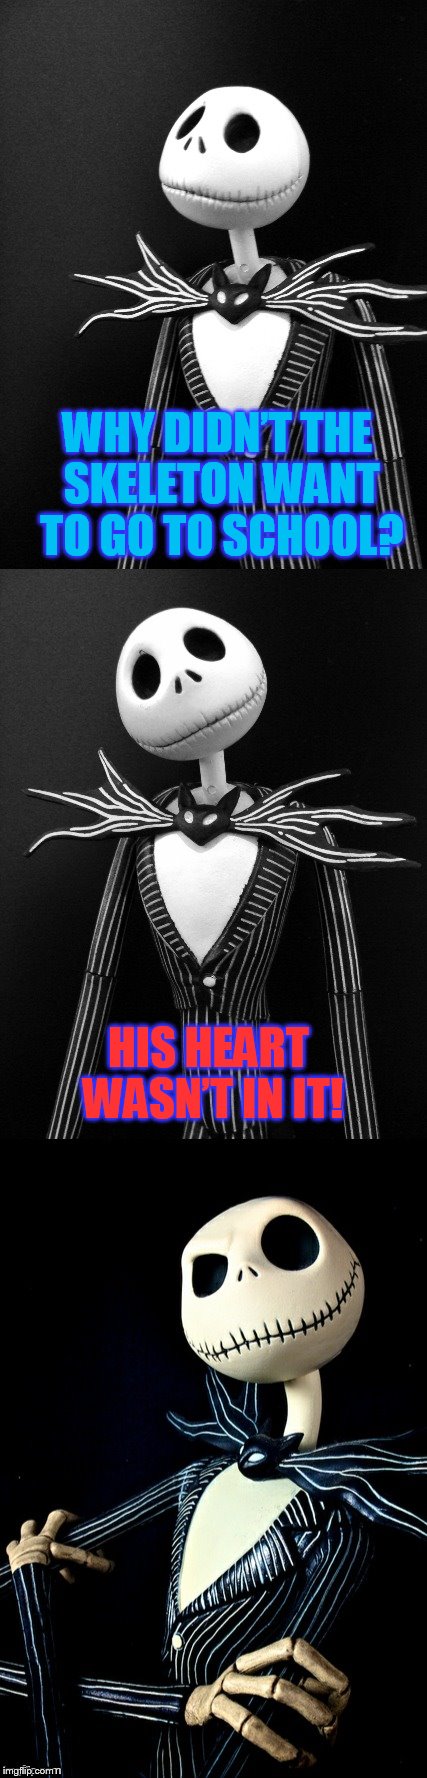 Happy Halloween! | WHY DIDN’T THE SKELETON WANT TO GO TO SCHOOL? HIS HEART WASN’T IN IT! | image tagged in jack puns,jokes,halloween,funny memes,skeleton,laughs | made w/ Imgflip meme maker